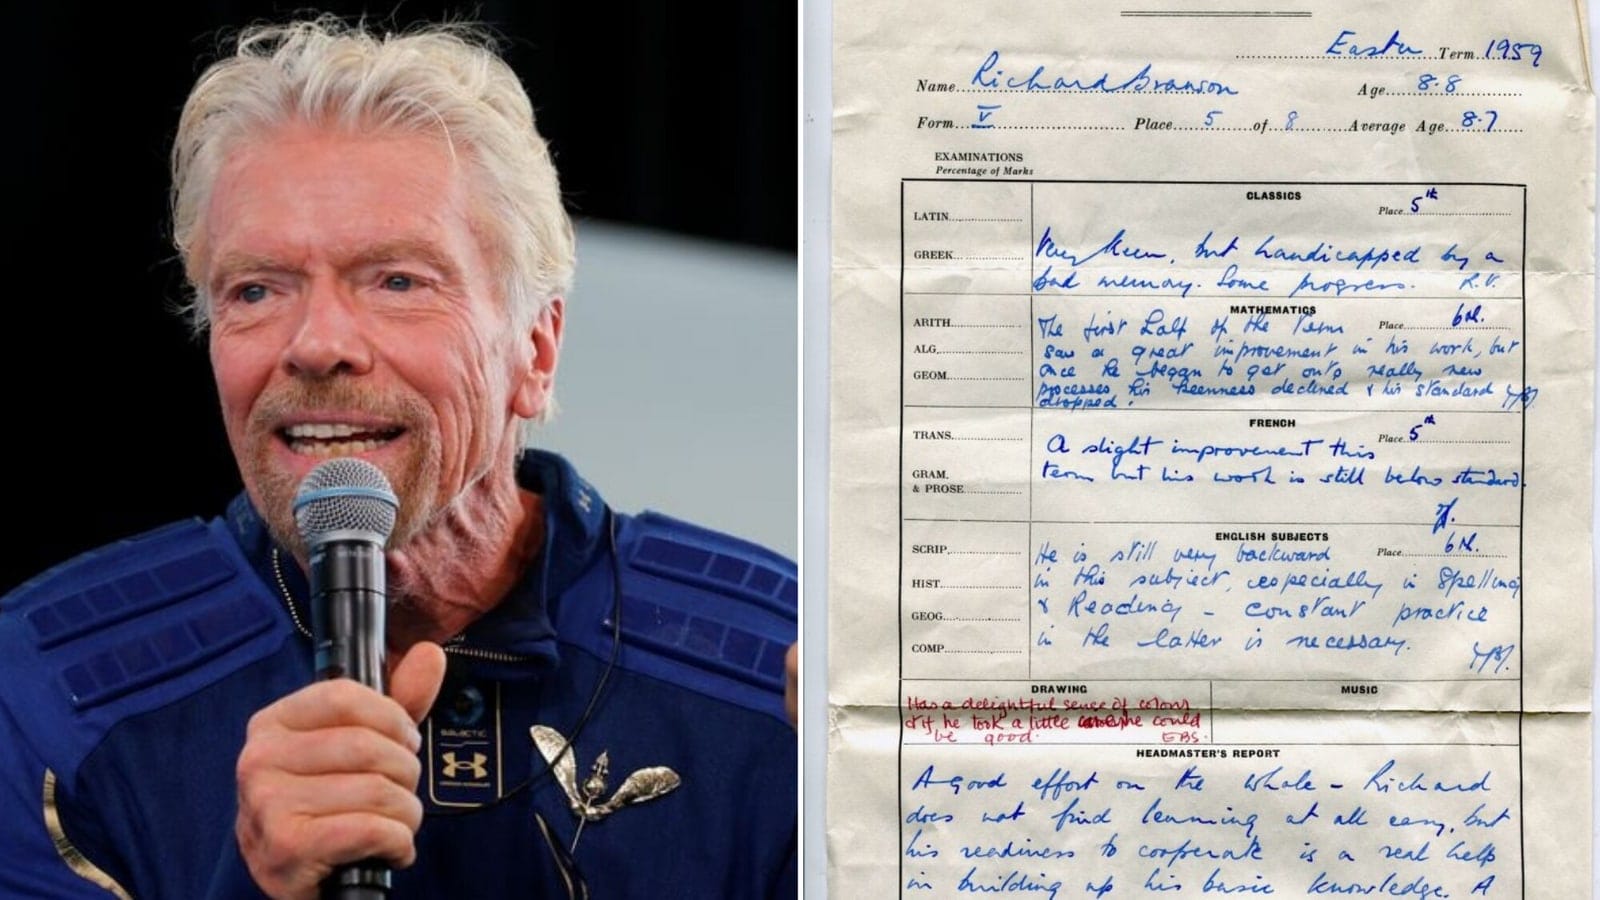 Richard Branson shares report from 65 years ago: ‘Going through school with undiagnosed dyslexia’